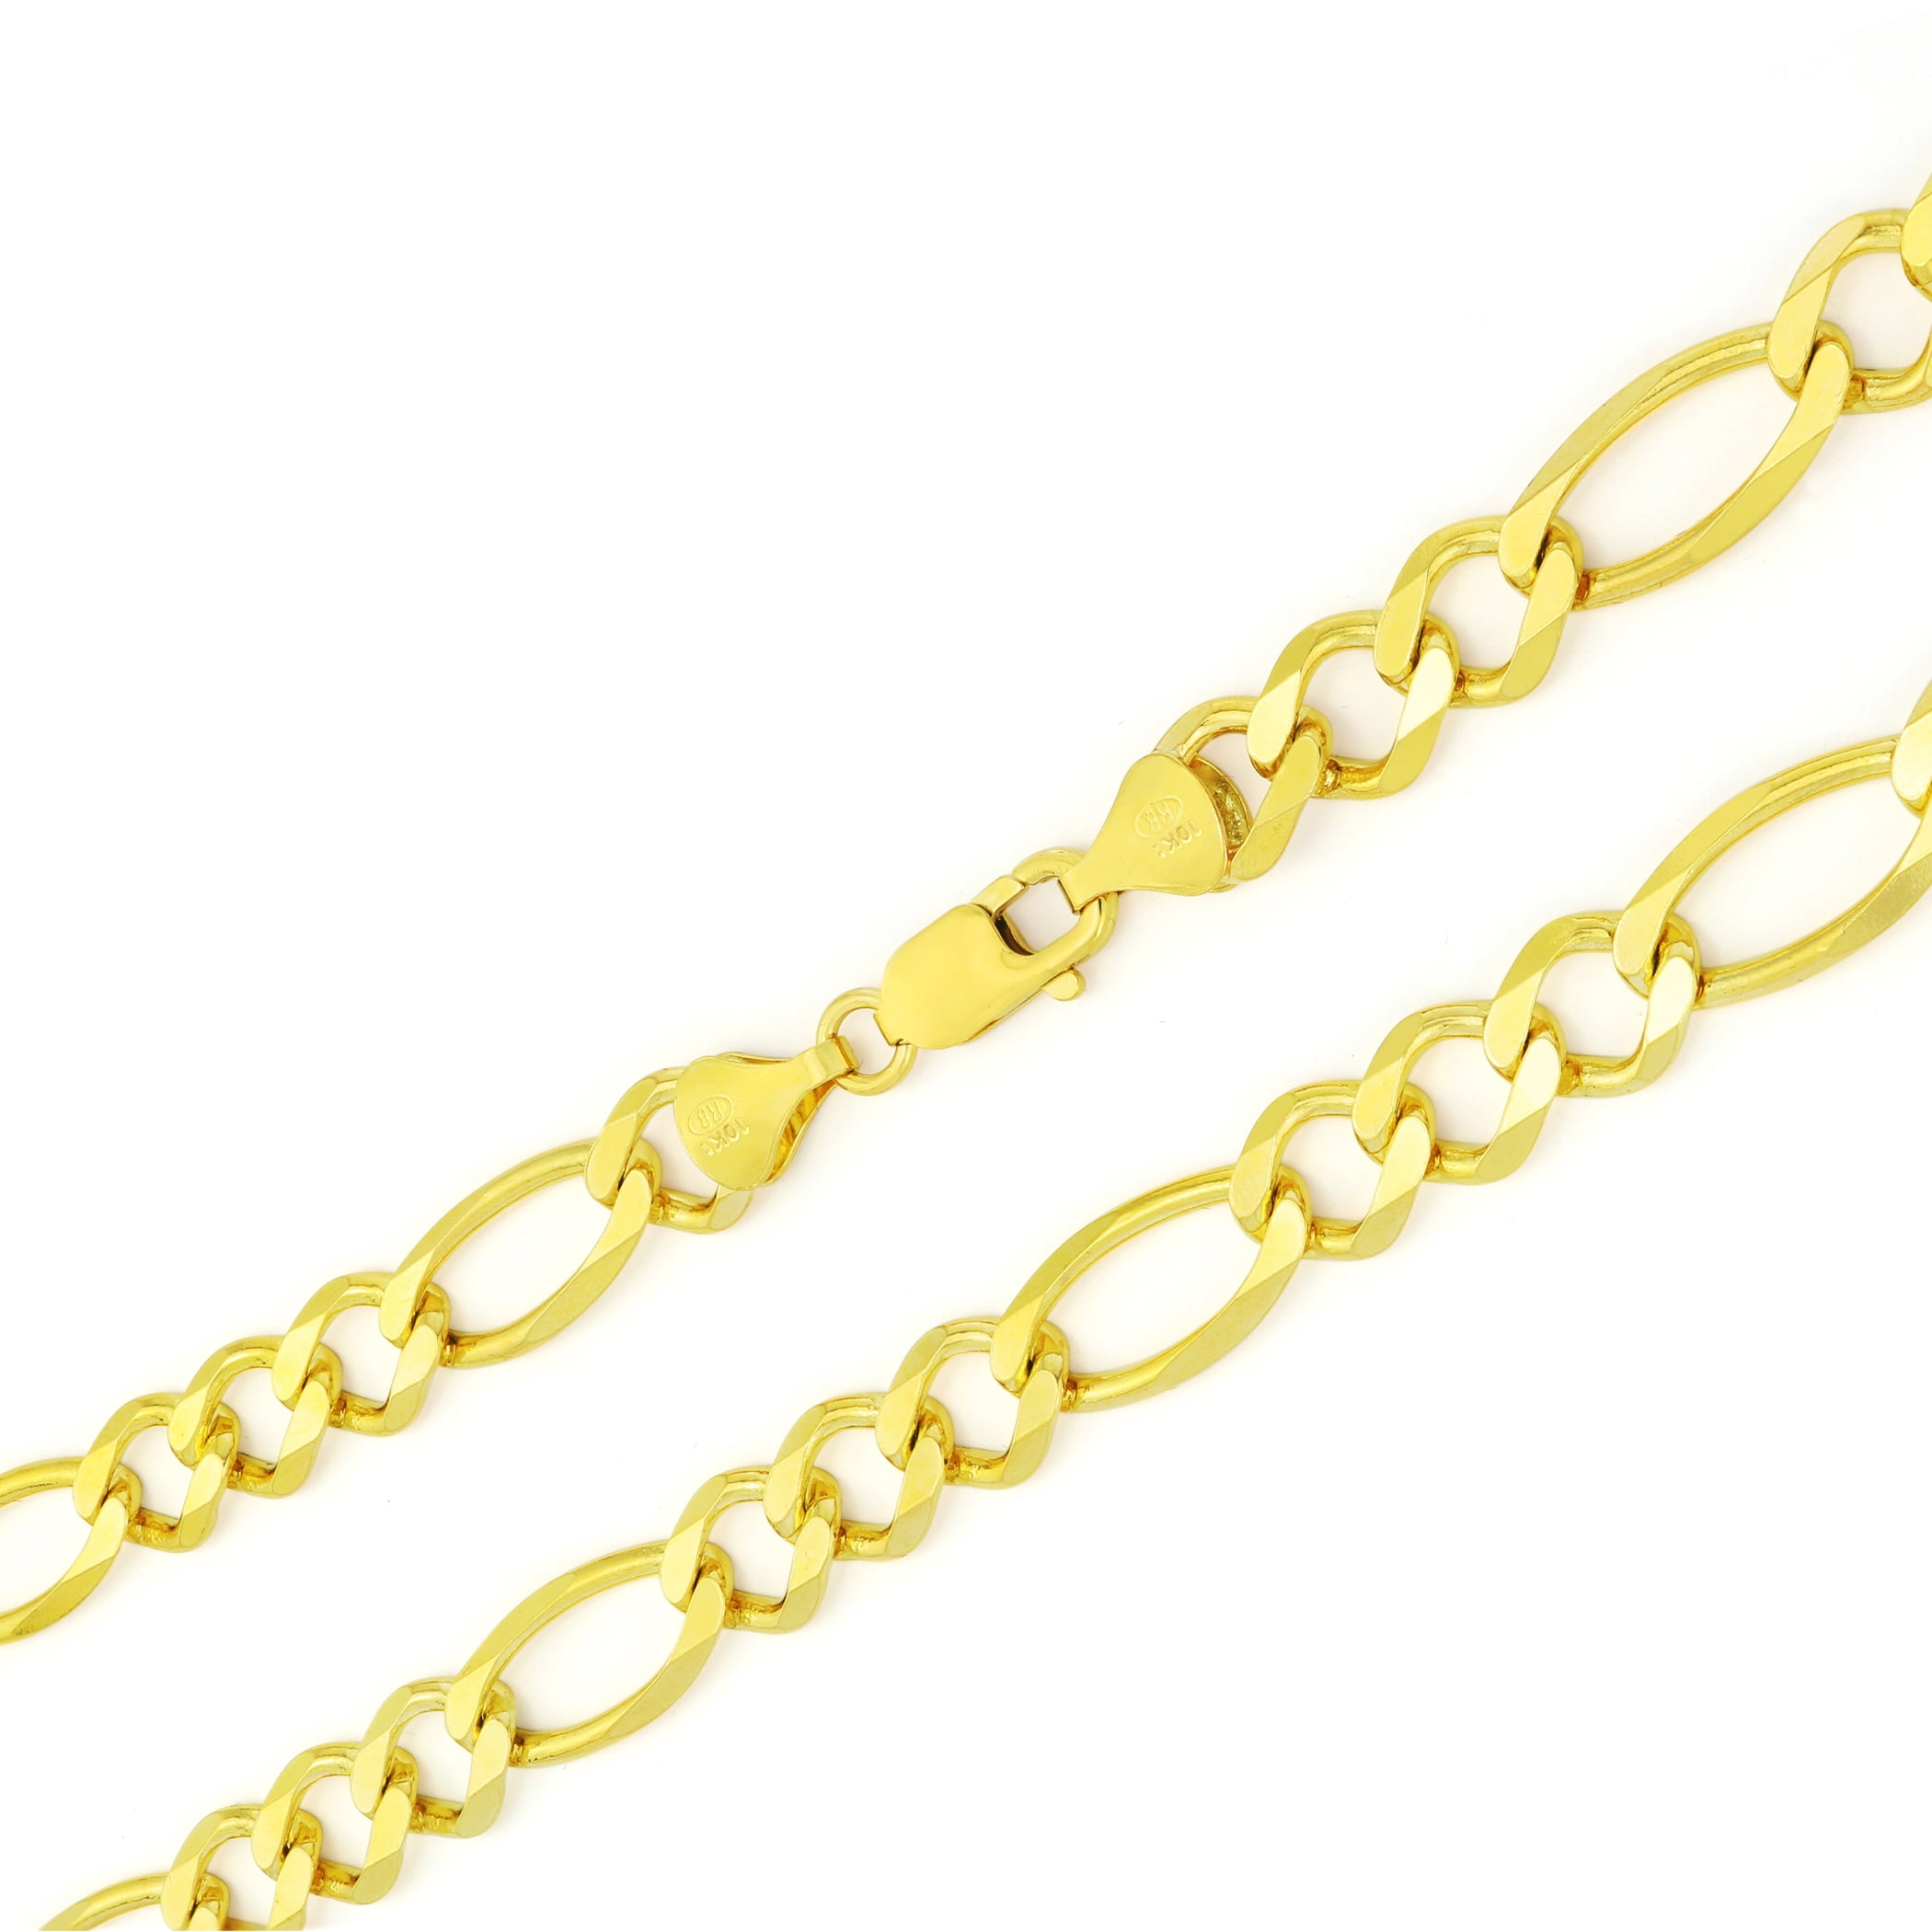 30" 10K REAL YELLOW GOLD 2mm 9.5mm Figaro Chain Pendant Necklace Bracelet 7" 